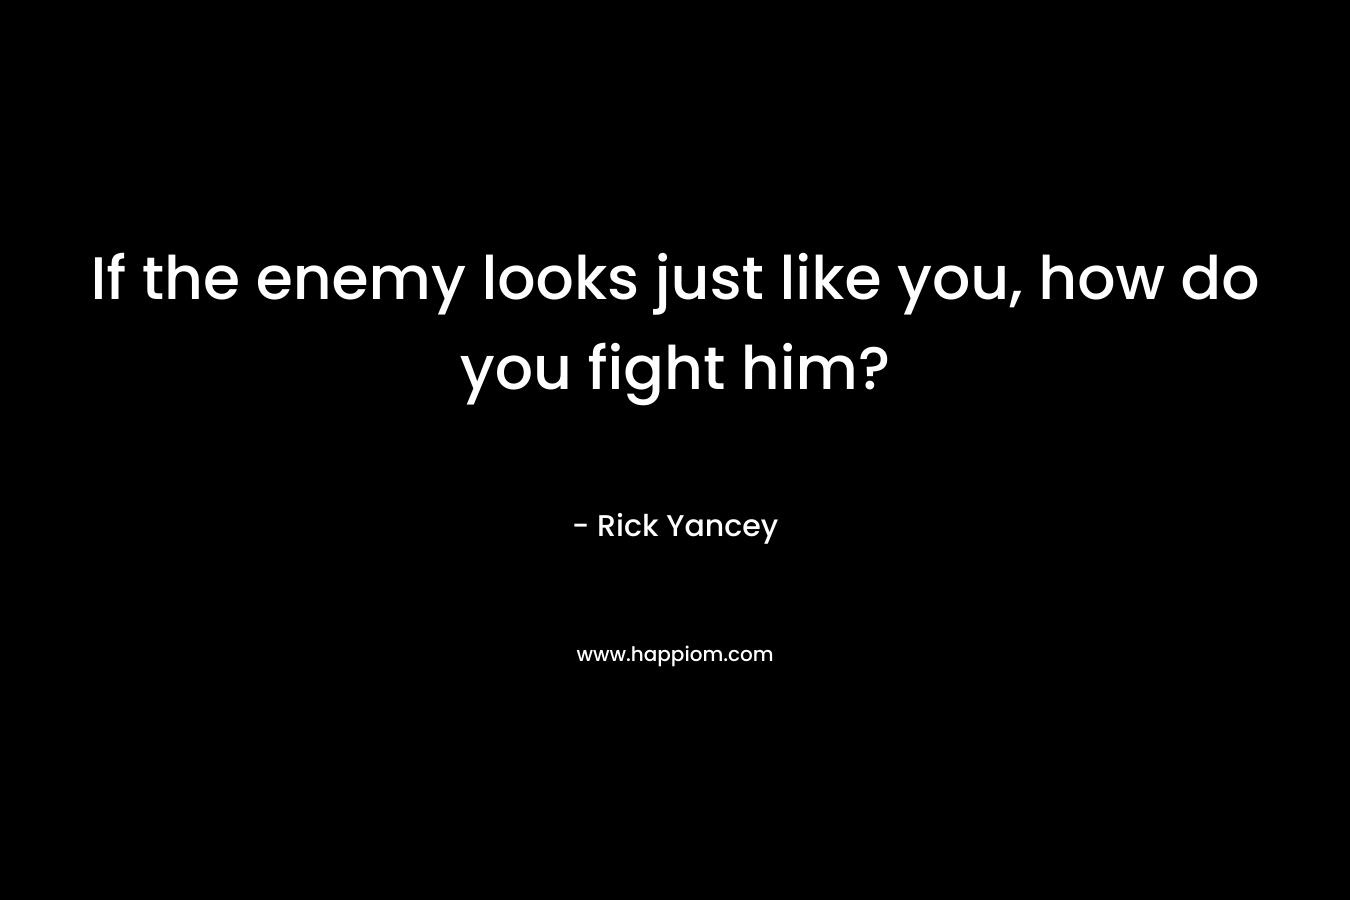 If the enemy looks just like you, how do you fight him? – Rick Yancey